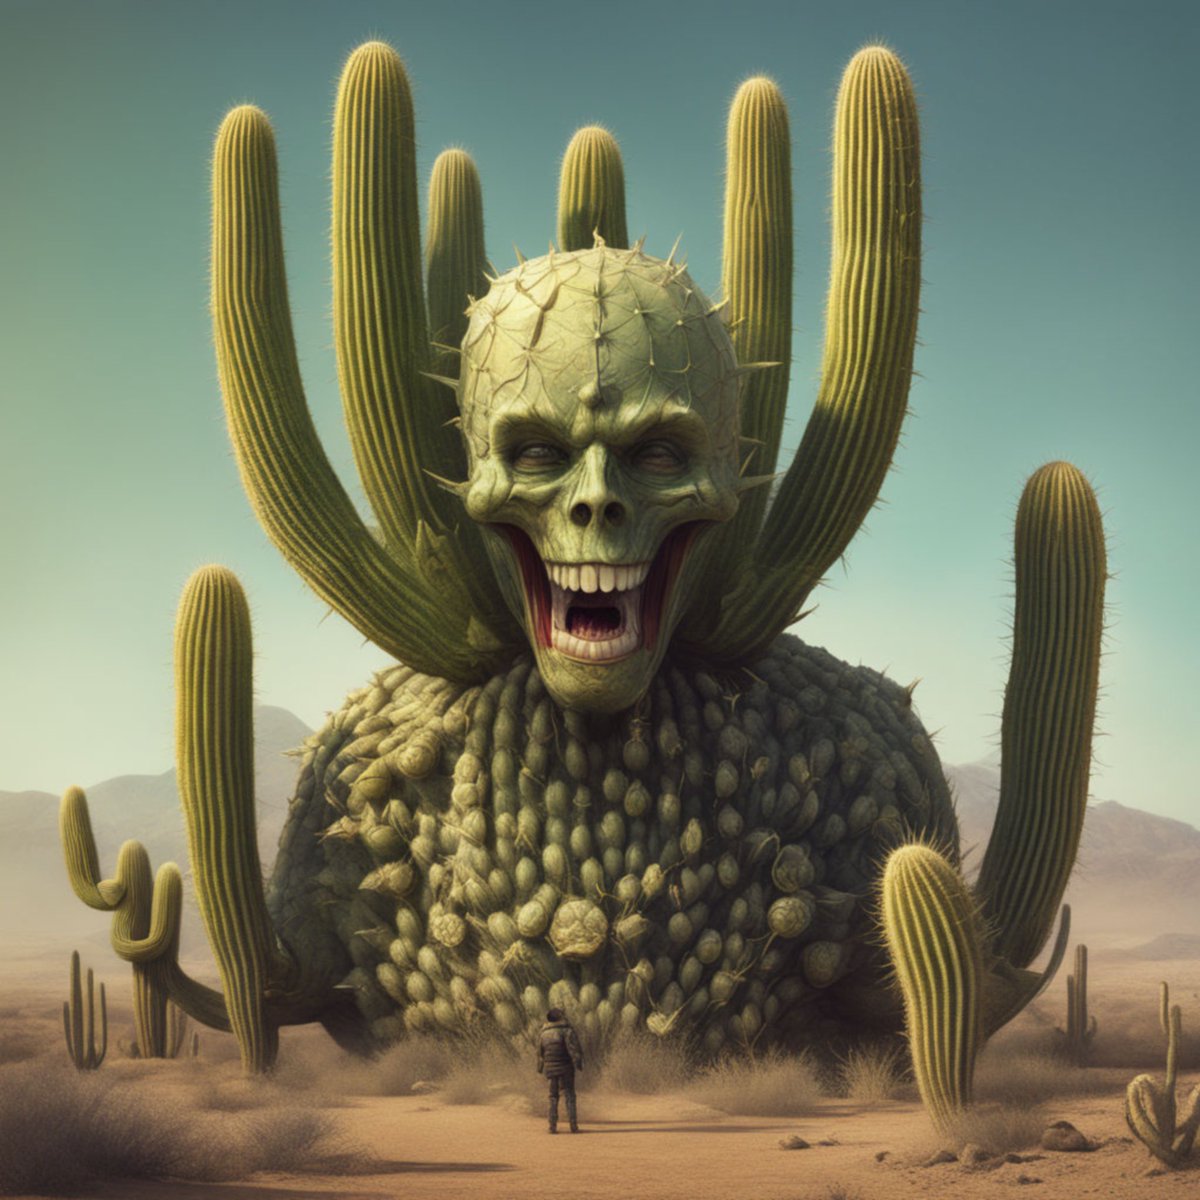 “Scary Cactus Skull”
1/1 Ed. - 10 xtz on @objktcom 

Collaboration with #CactusBoomtez

“In moon's pale glow, a fearsome sight,
Cactus skull, eerie in the night.
Hollow eyes and thorny grin,
A chilling presence from within…”
#NErdemsArt #tezos #SavageNation #HashTera #PPN